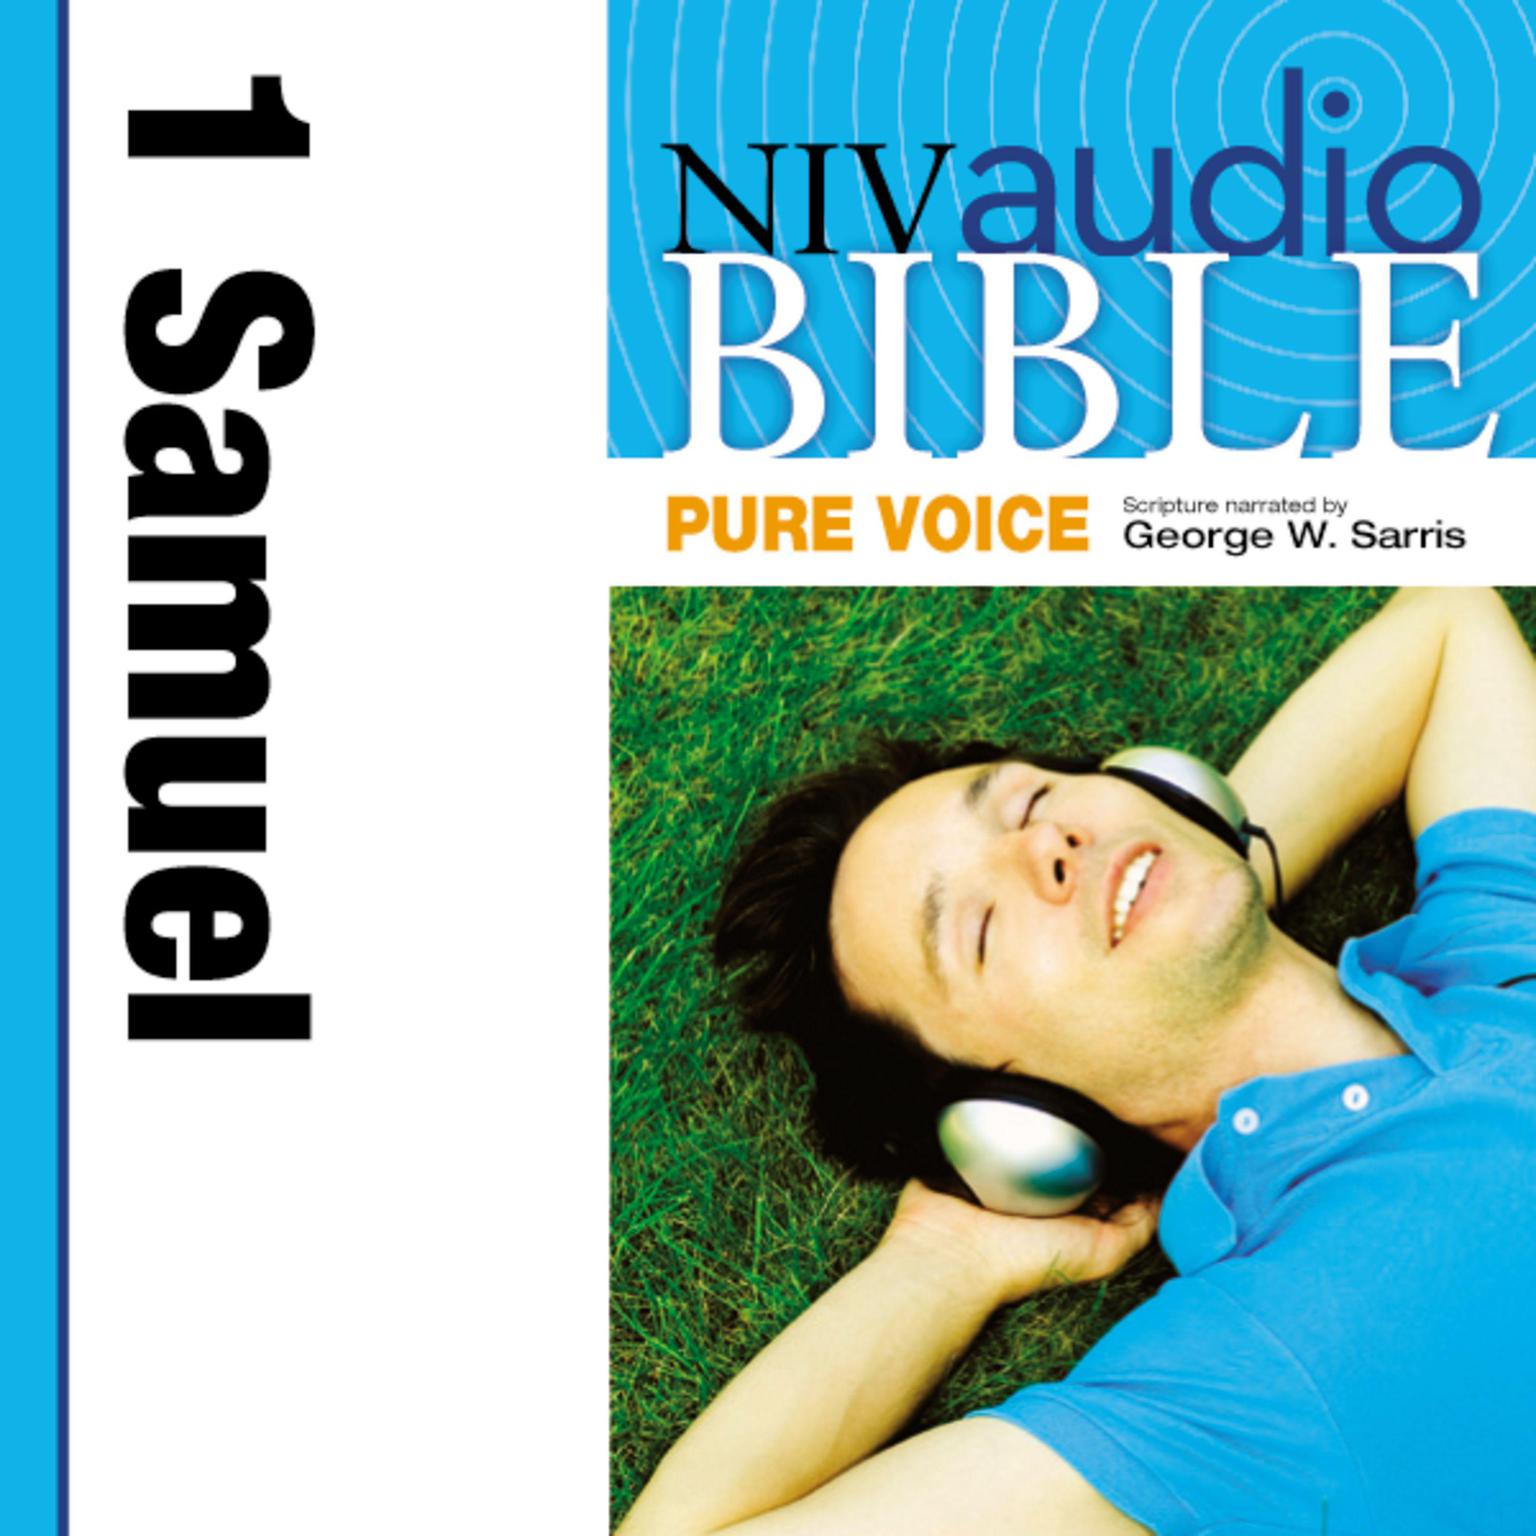 Pure Voice Audio Bible - New International Version, NIV (Narrated by George W. Sarris): (08) 1 Samuel Audiobook, by Zondervan